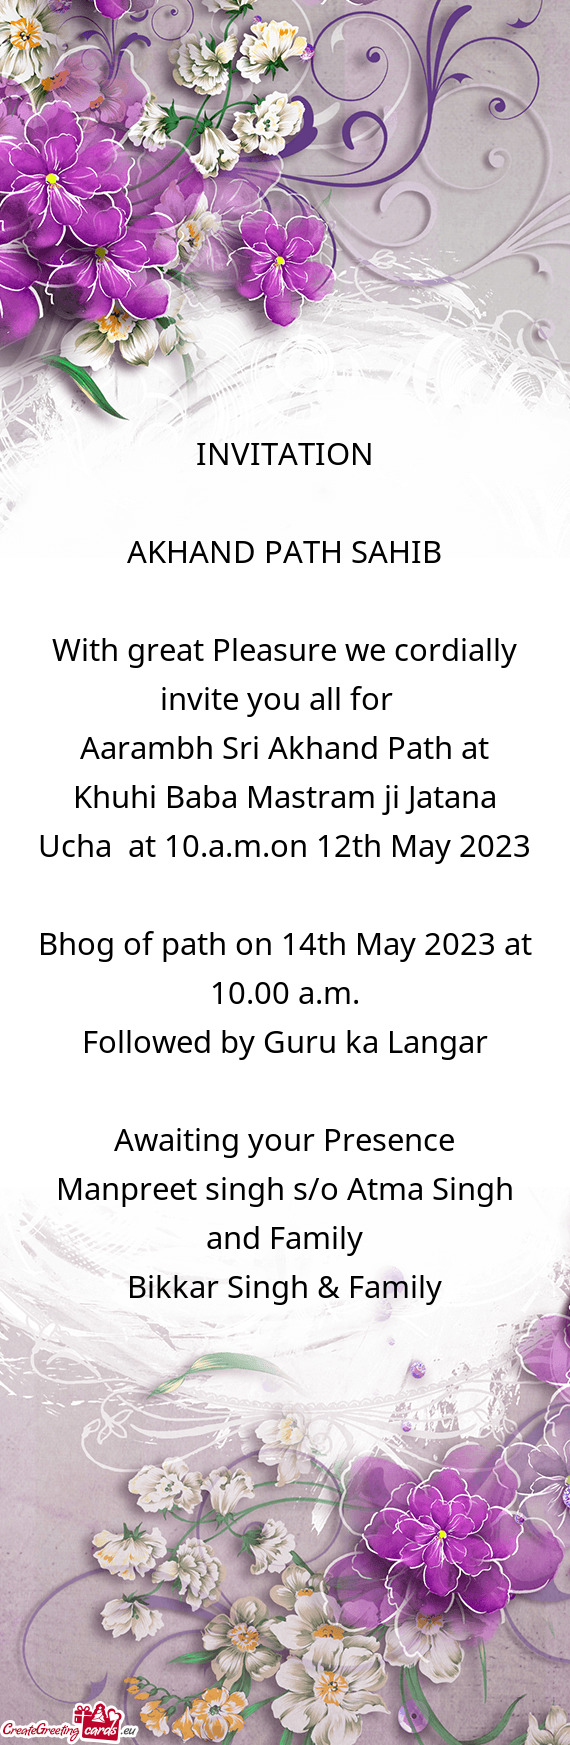 Bhog of path on 14th May 2023 at 10.00 a.m